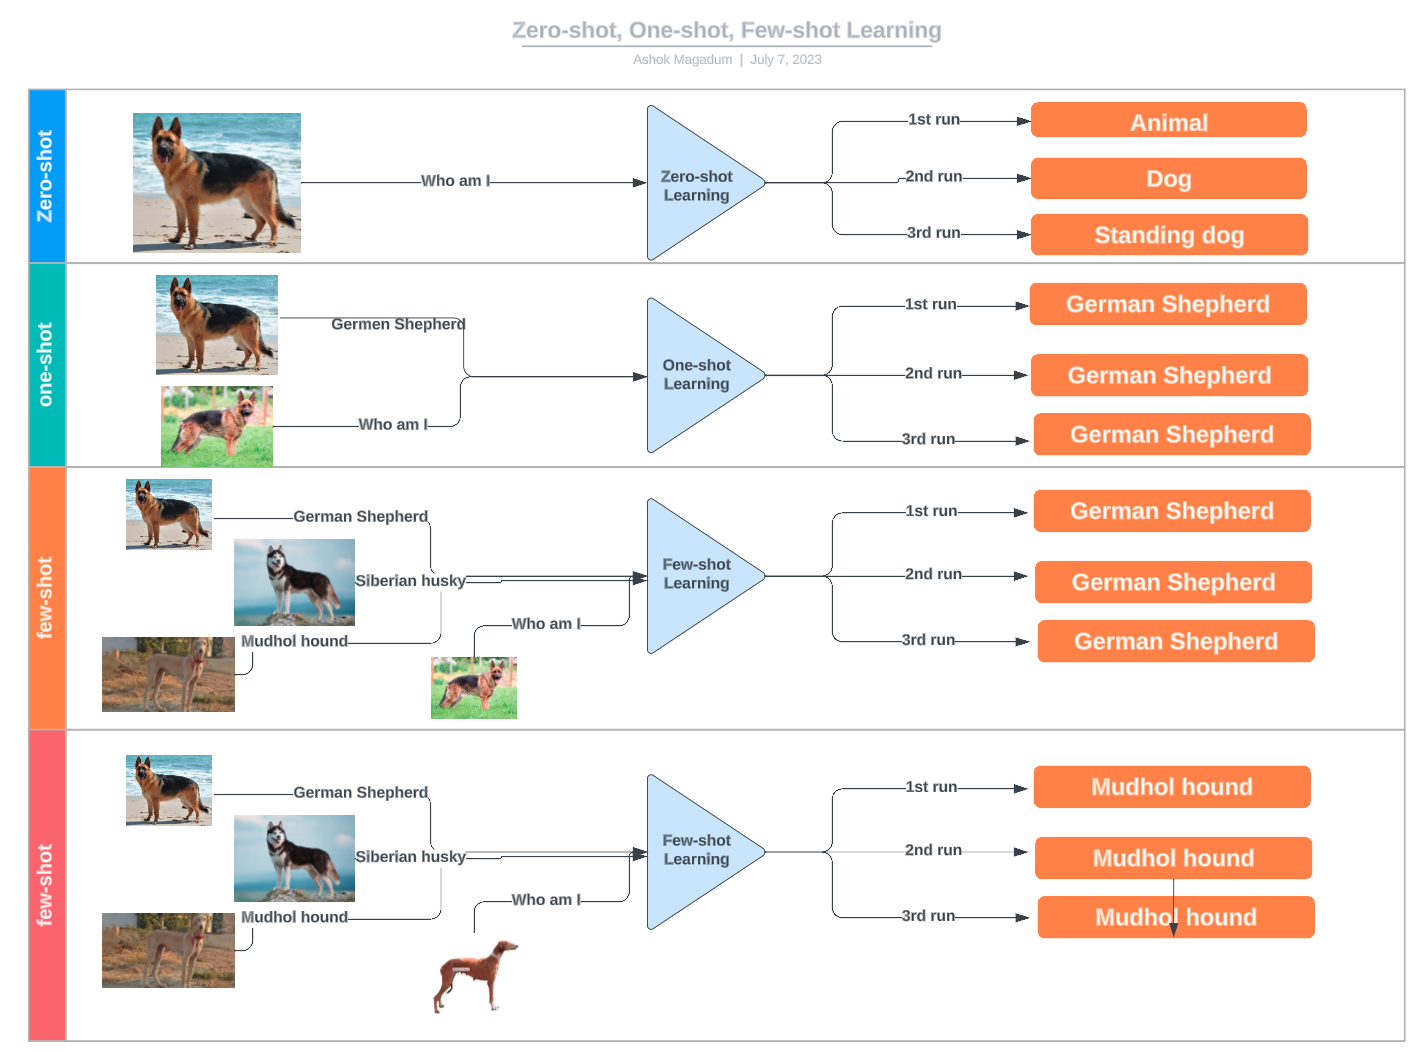 Diagram showing zero-shot, one-shot, and few-shot learning approaches for classifying dog breeds like German Shepherd and Mudhol hound from limited examples.